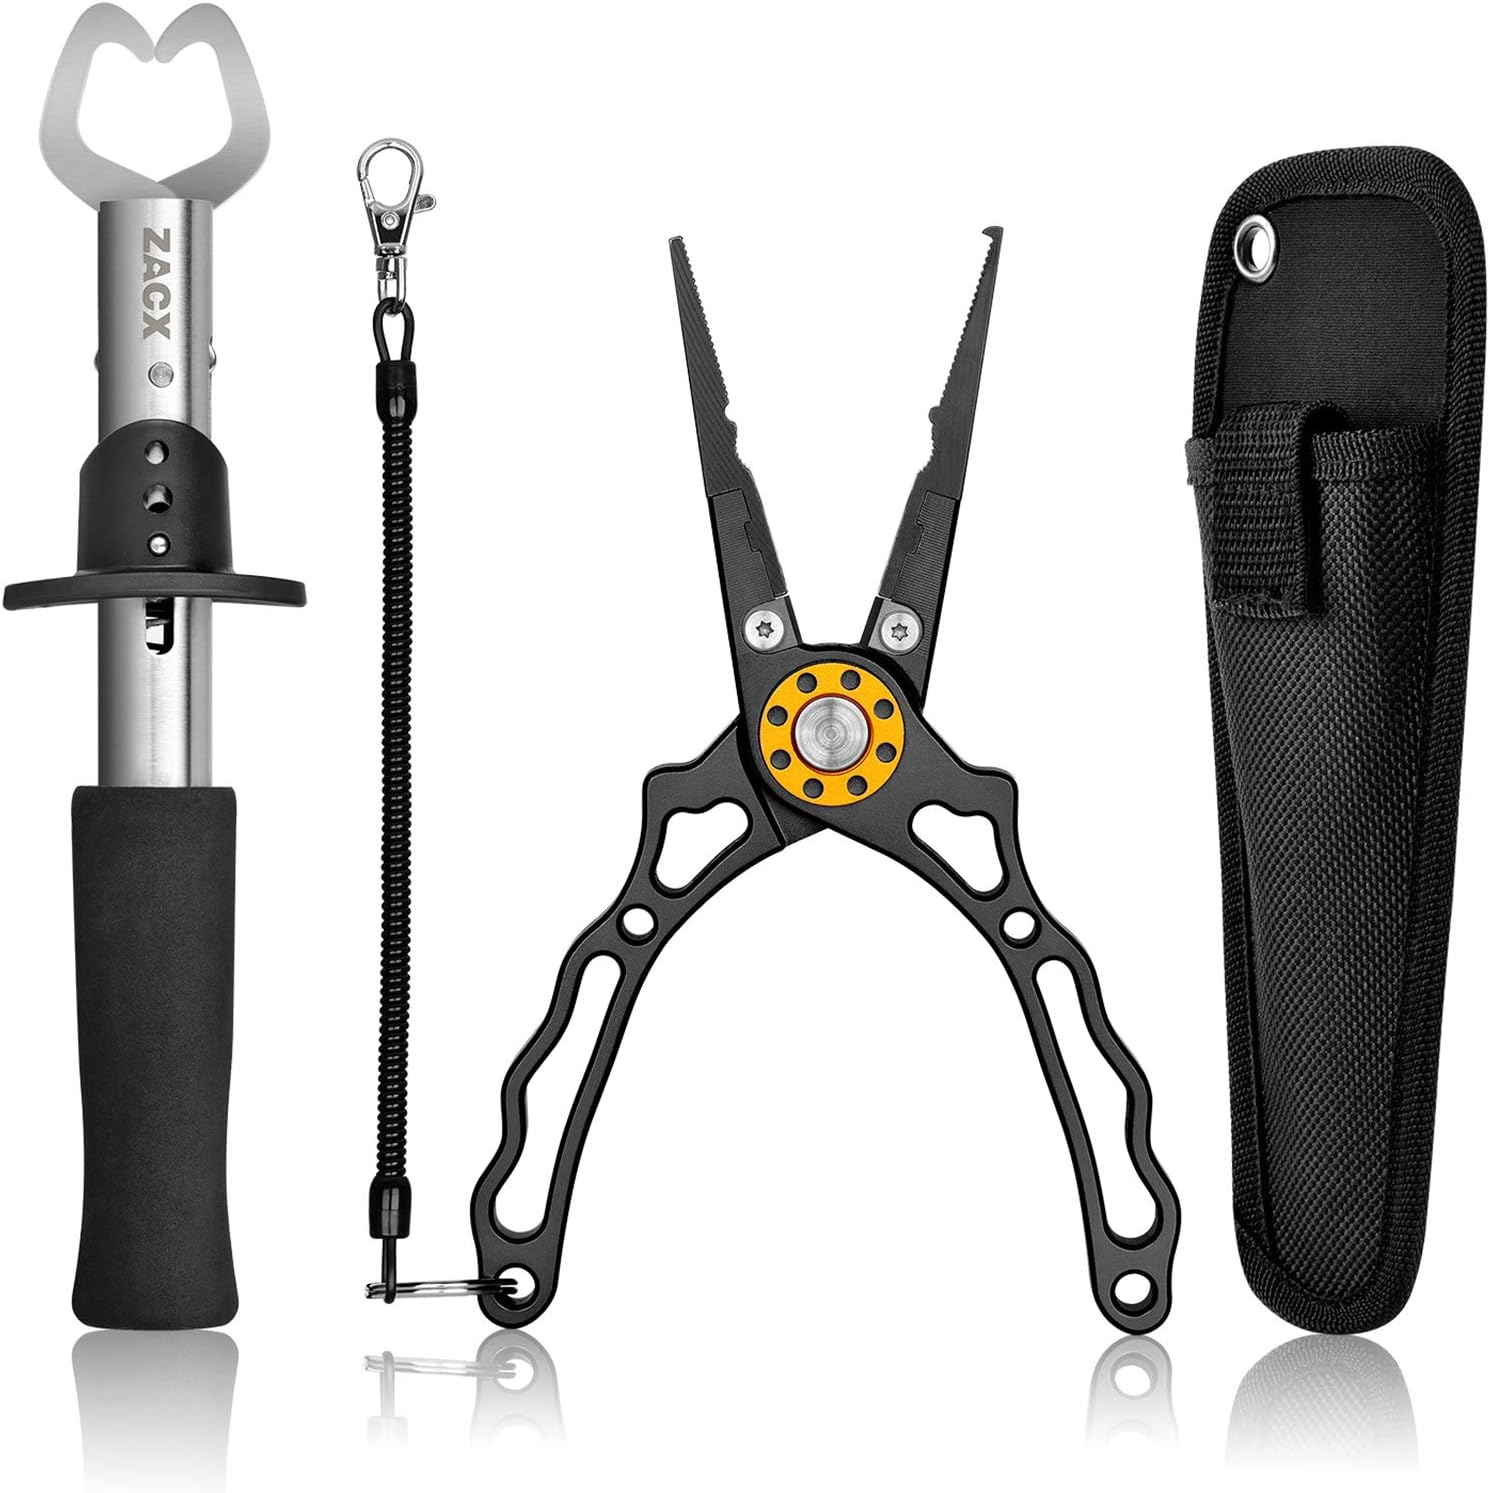 ZACX Fish Lip Gripper Pliers - Upgraded Muti-Function Hook Remover and Split Ring Pliers for Fly Fishing, Ice Fishing, Fishing Gear - Gift for Men (Package B) - ZACX Fish Lip Gripper Pliers Review